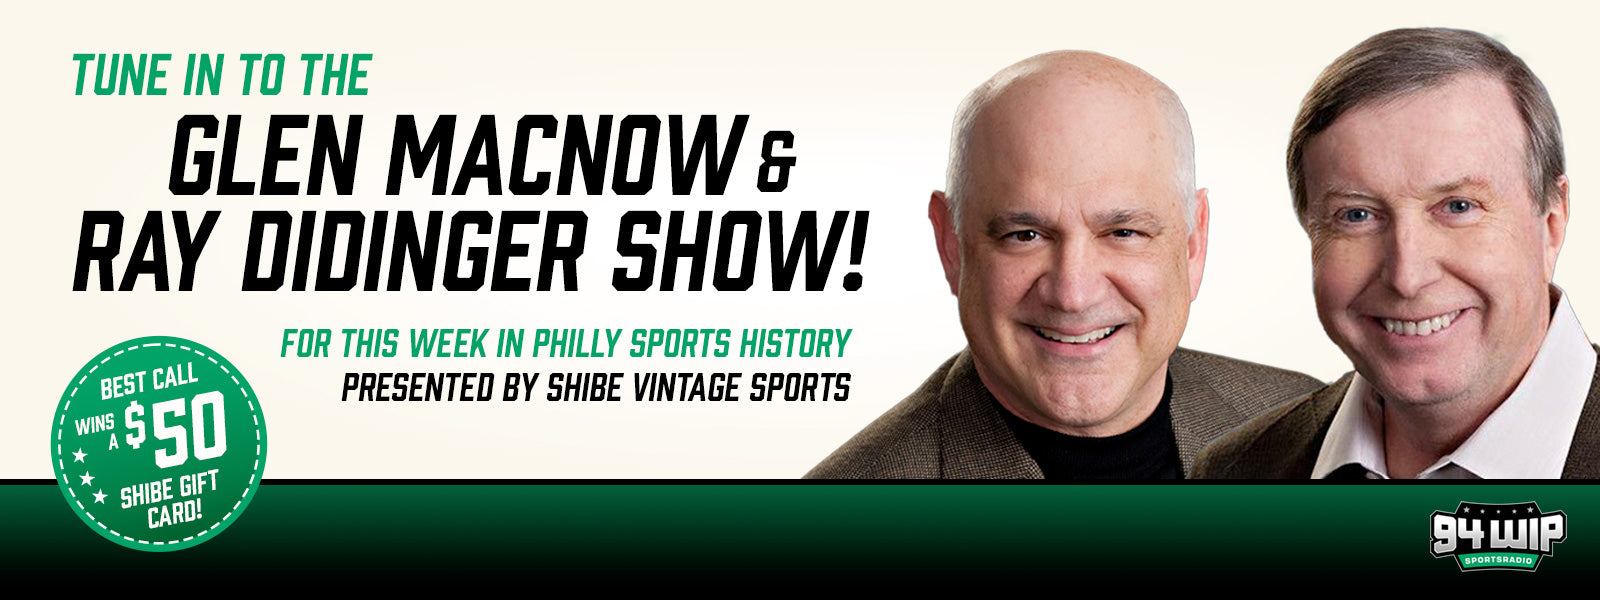 Listen to This Week in Philly Sports History Saturdays at 11am with Glen Macnow and Ray Didinger on 94 WIP radio